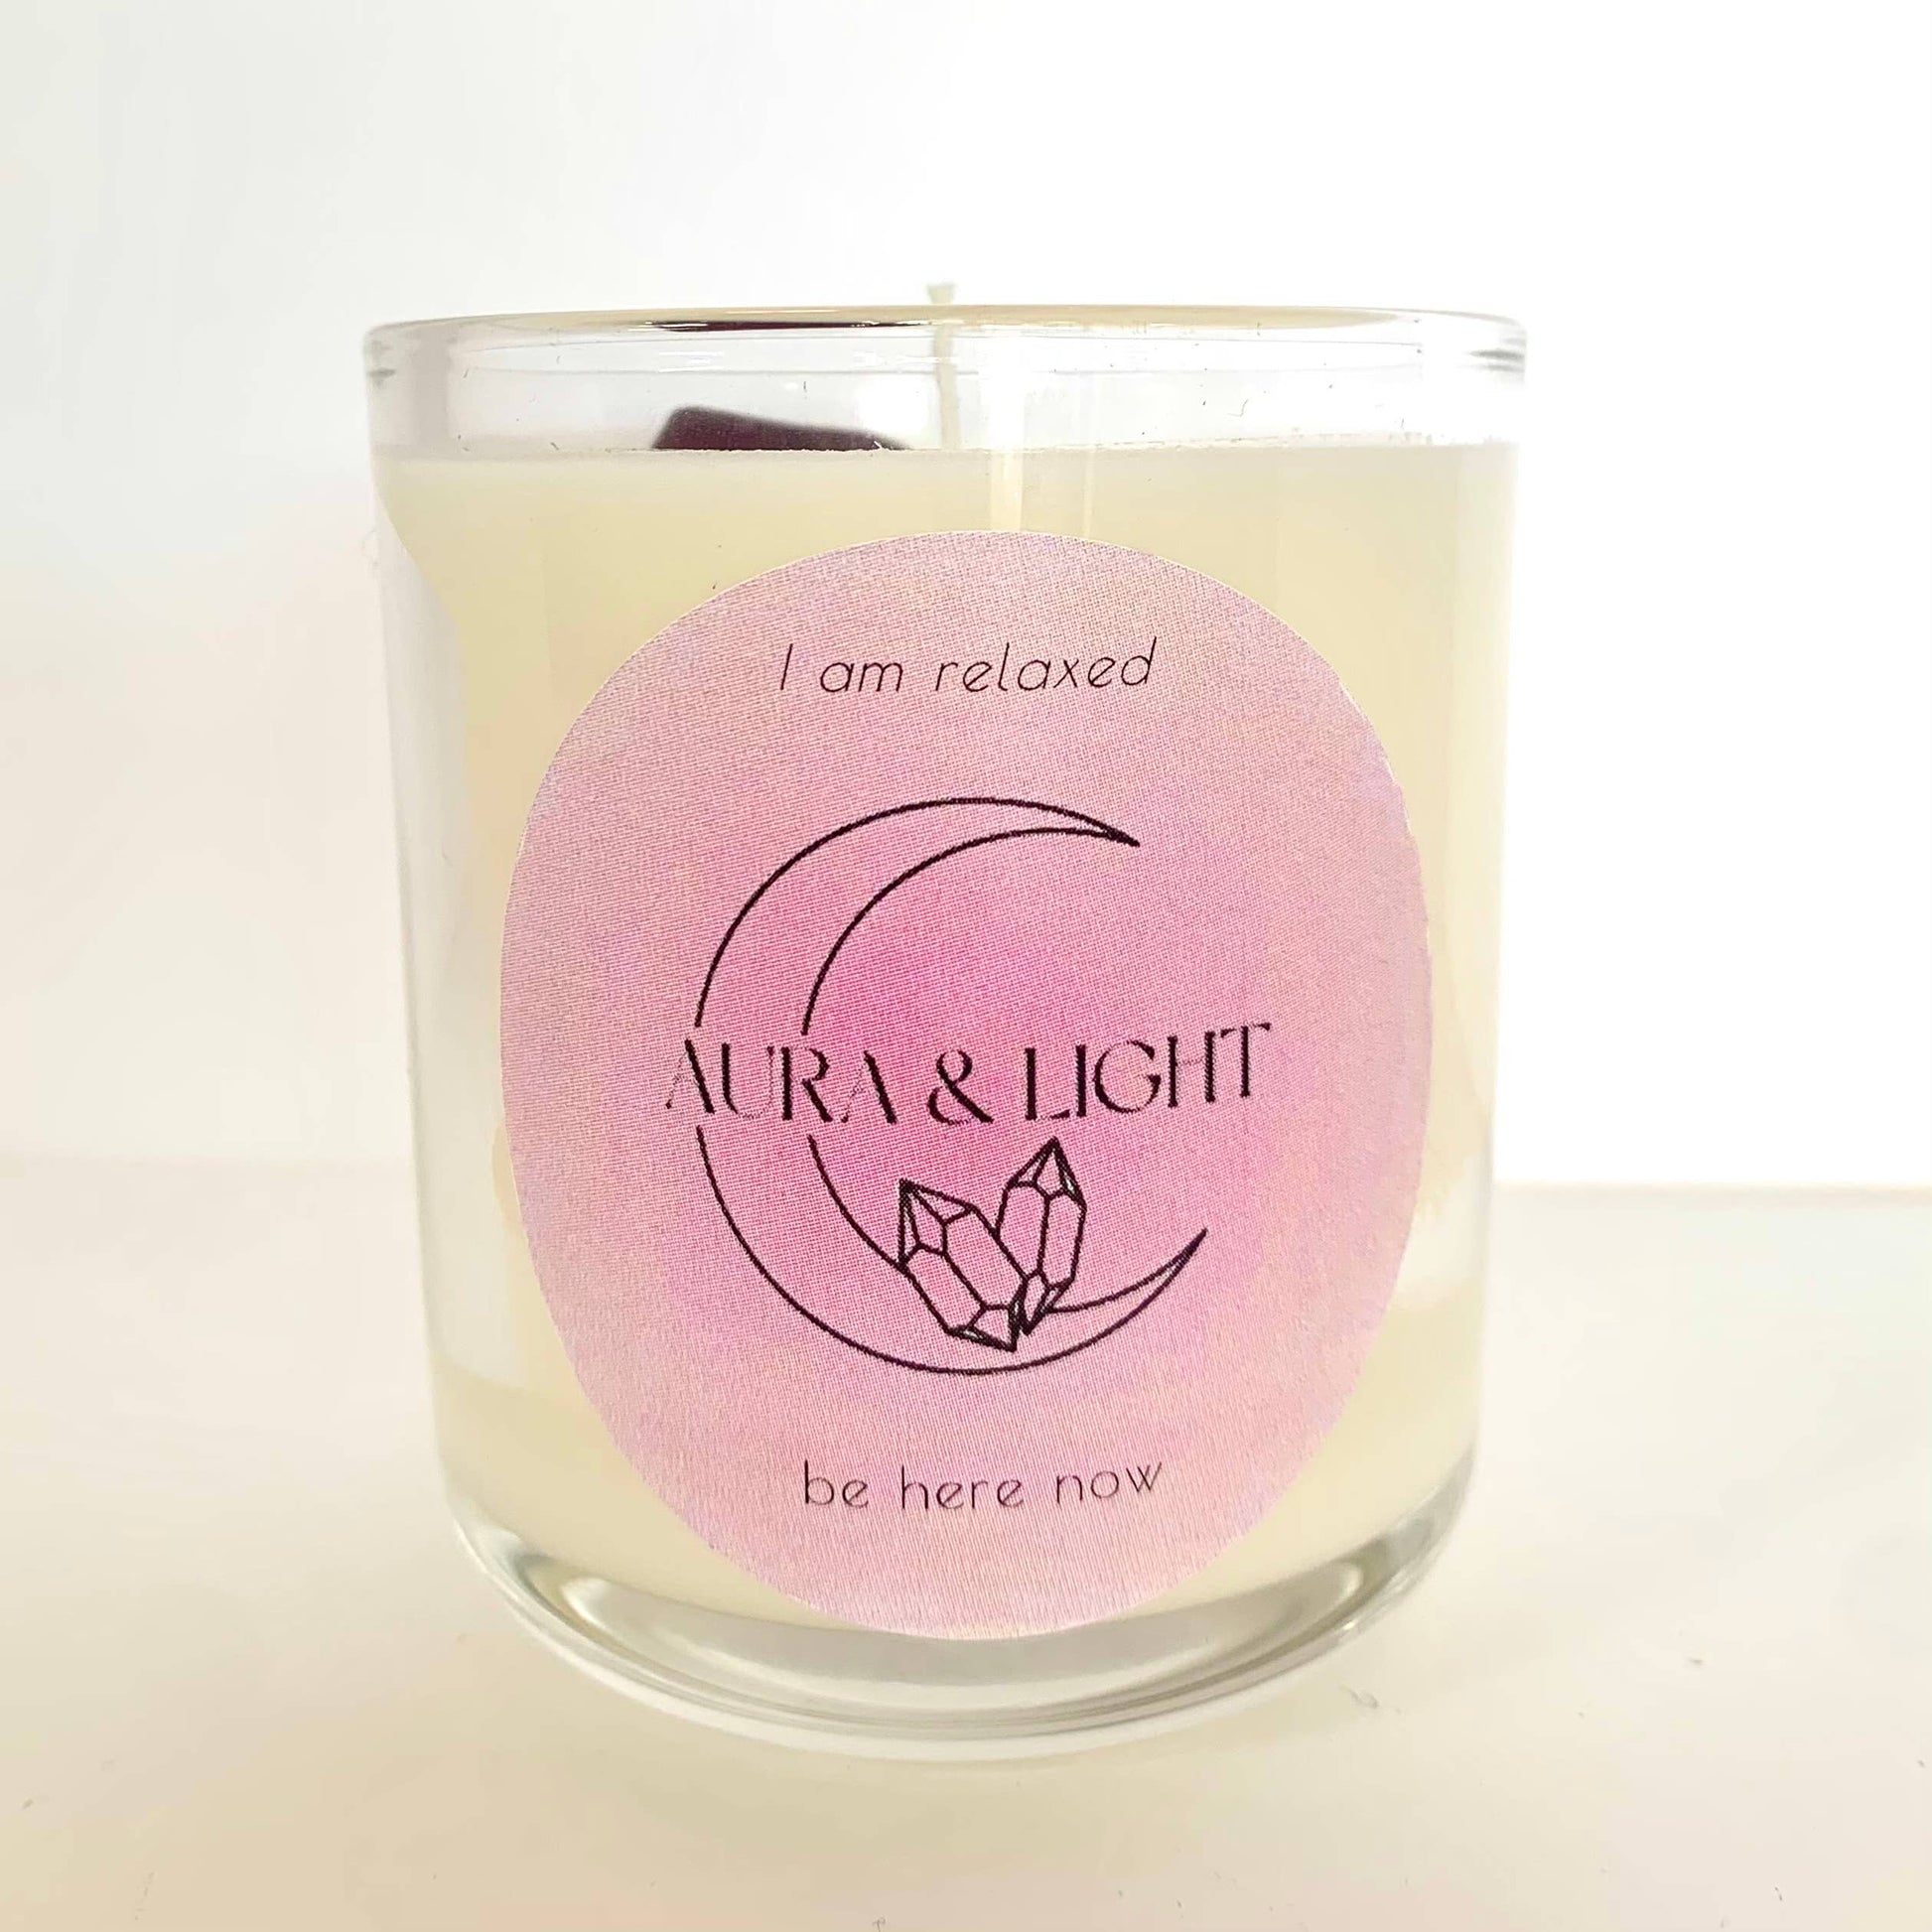 I am relaxed - Aura & Light Crystal Candle - Pluff Mud Mercantile